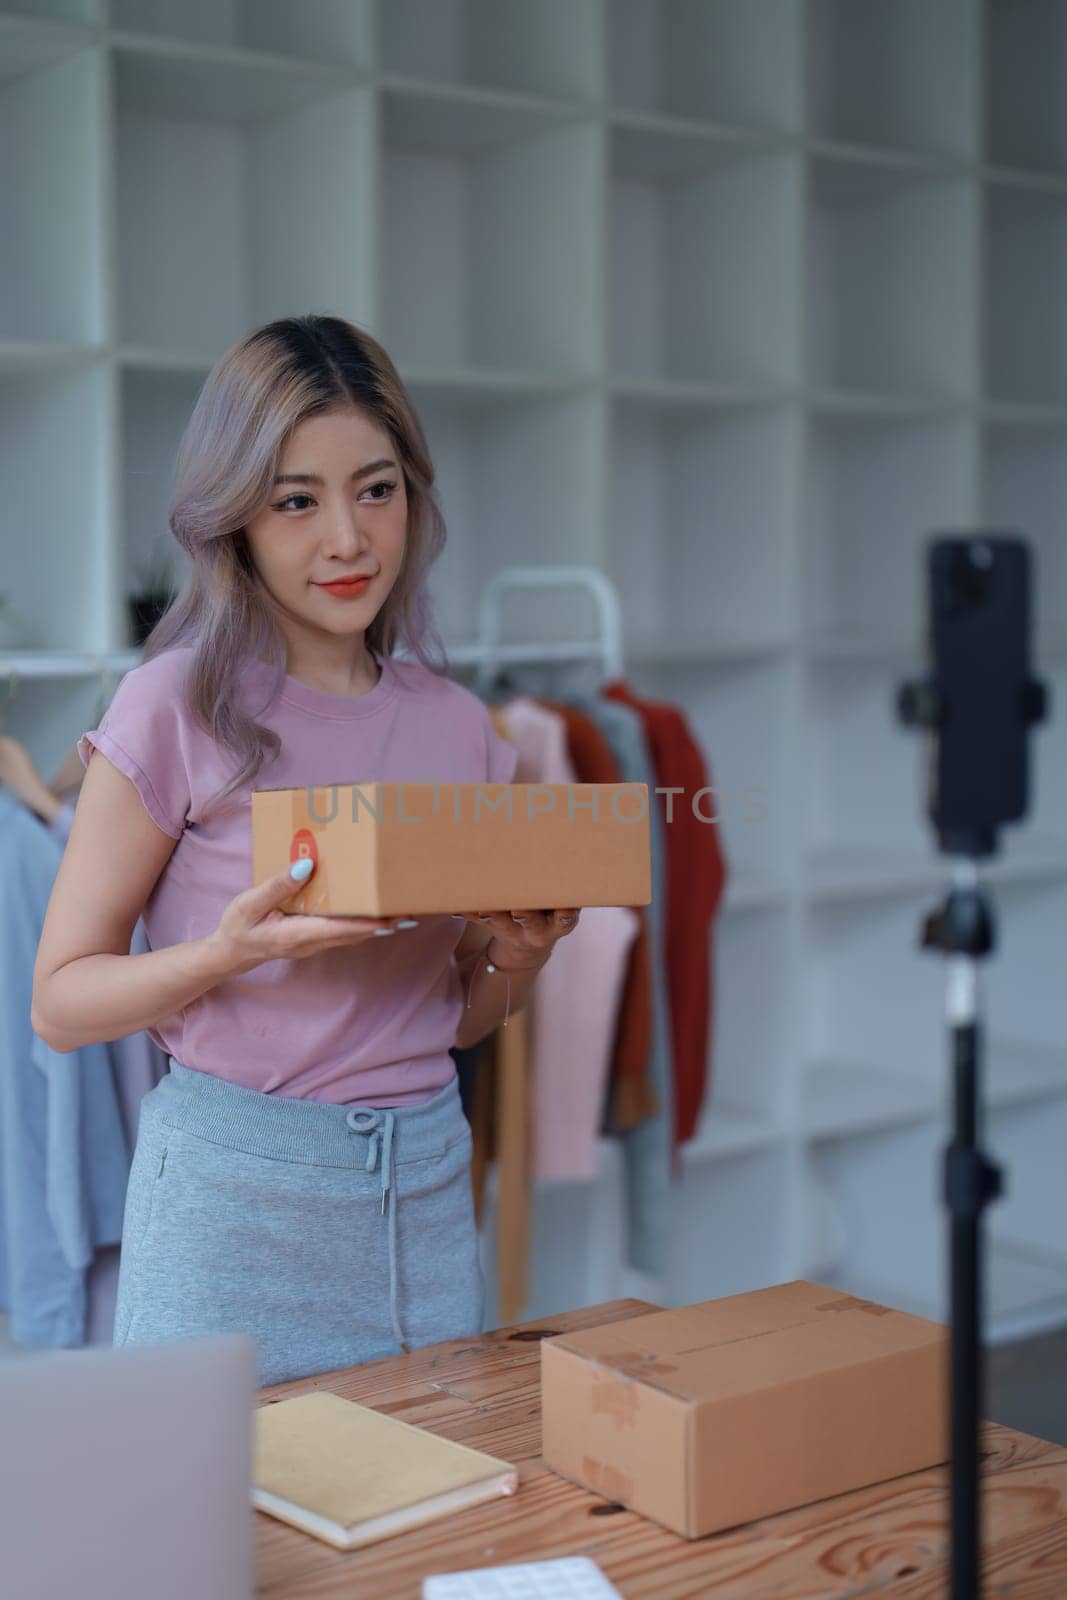 Beautiful Asian woman, blogger, blog, presenting fashion clothes, live video, social media, record her, sell online via digital cameras, sme or small business ecommerce concepts by Manastrong